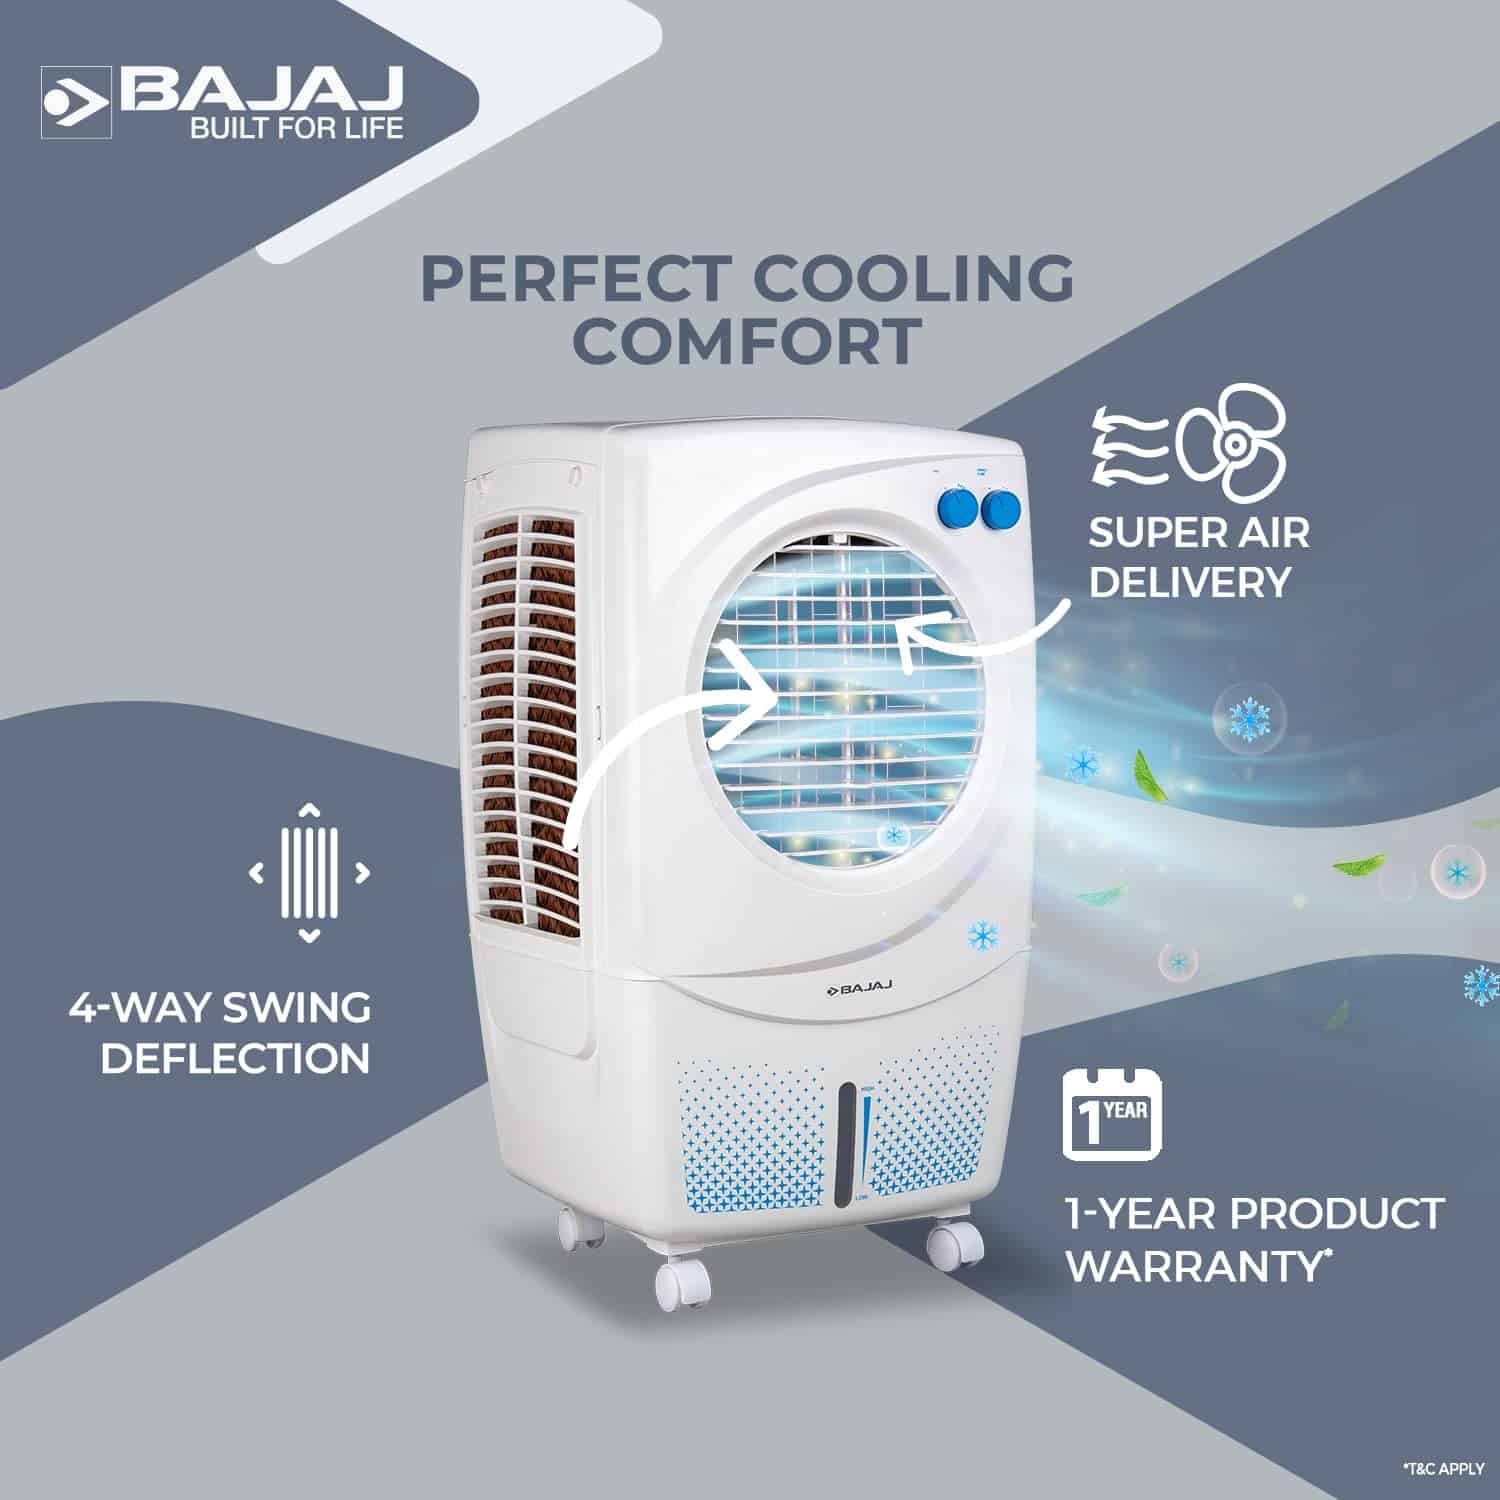 Bajaj PX 97 Torque New 36L Personal Air Cooler for home with DuraMarine Pump (2-Yr Warranty by Bajaj), TurboFan Technology, Powerful Air Throw & 3-Speed Control, Portable AC, White cooler for room